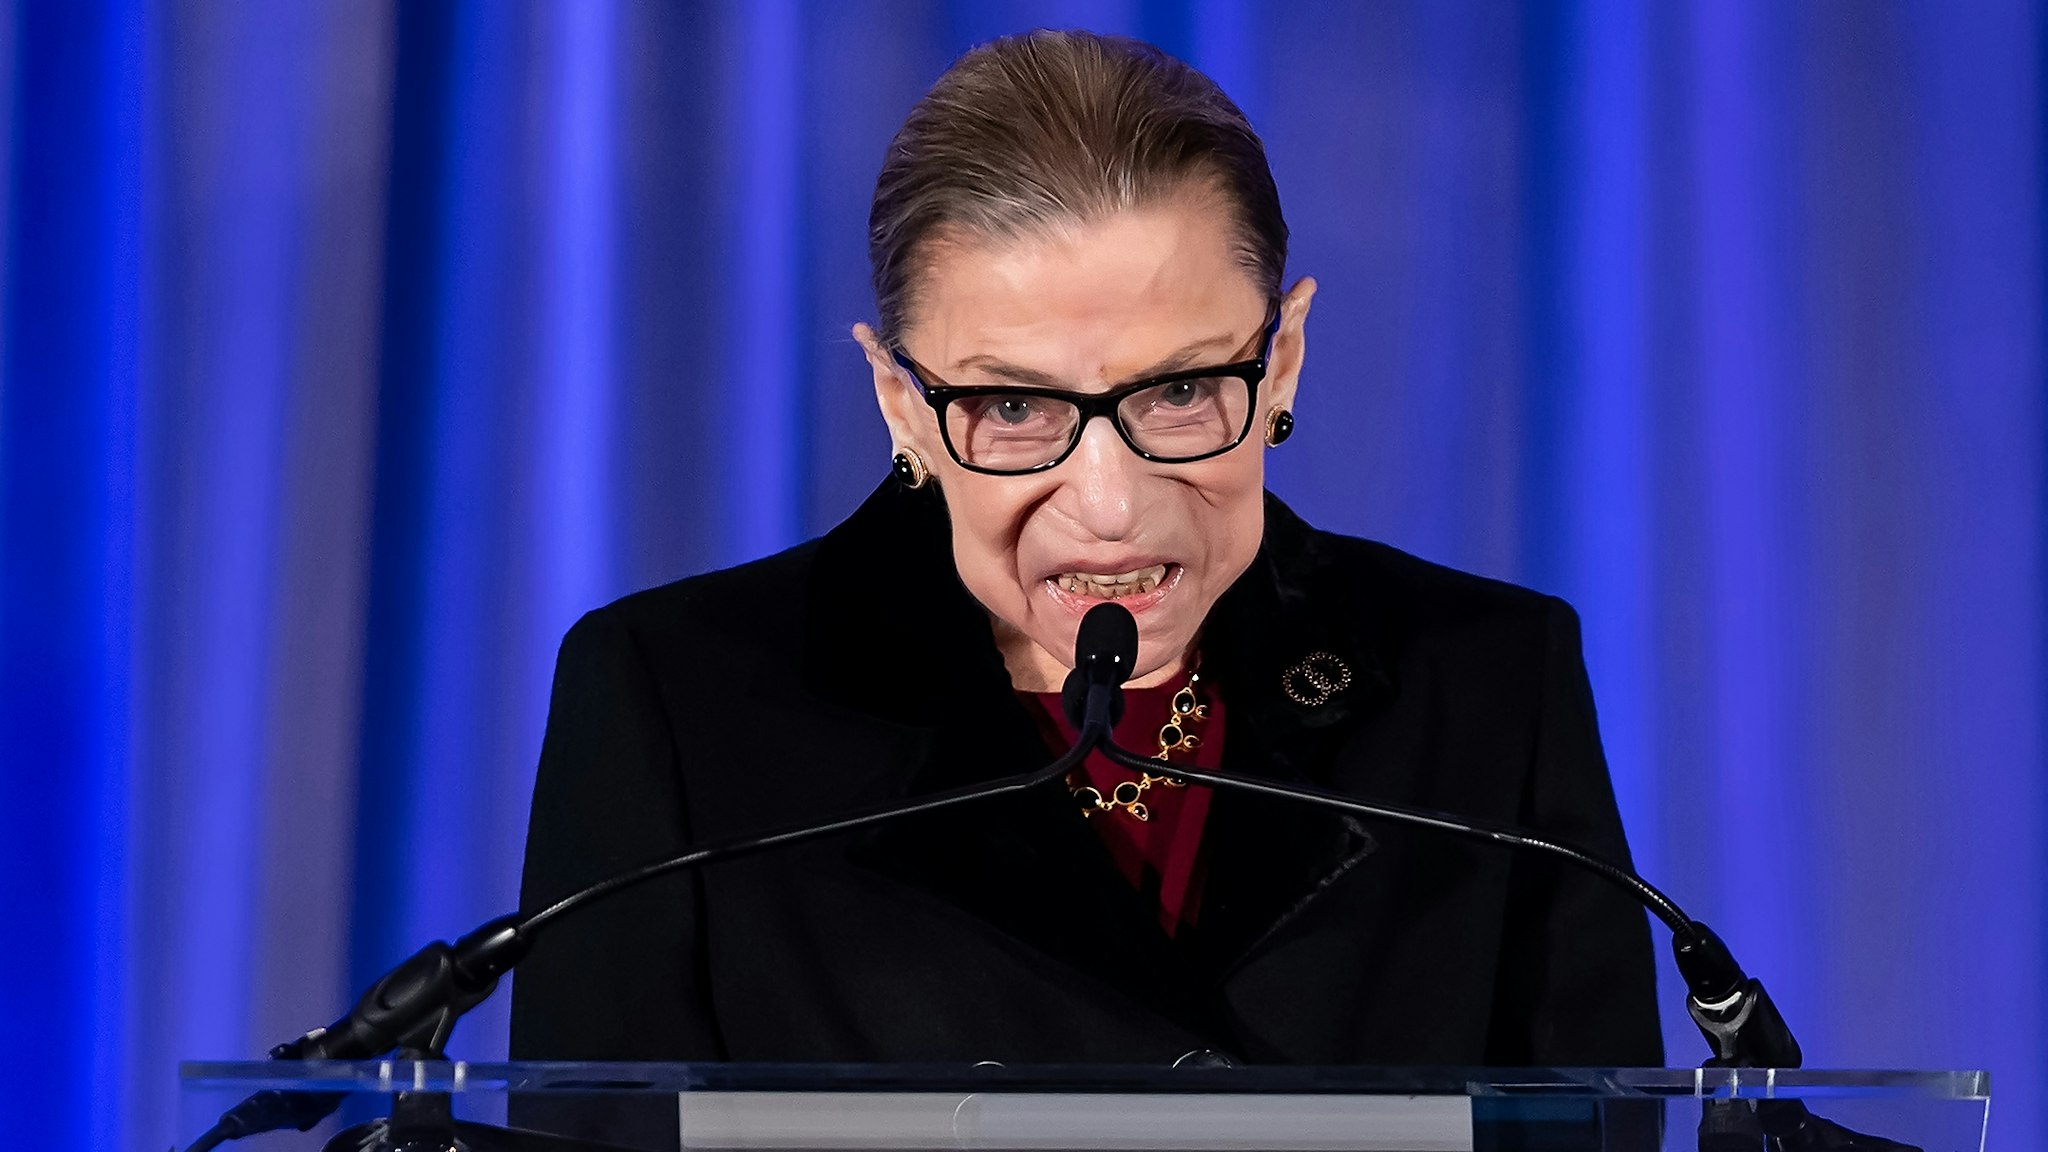 PHILADELPHIA, PENNSYLVANIA - DECEMBER 19: U.S. Supreme Court Justice Ruth Bader Ginsburg speaks on stage during her induction into The National Museum Of American Jewish History's Only In America Gallery at National Museum of American Jewish History on December 19, 2019 in Philadelphia, Pennsylvania.